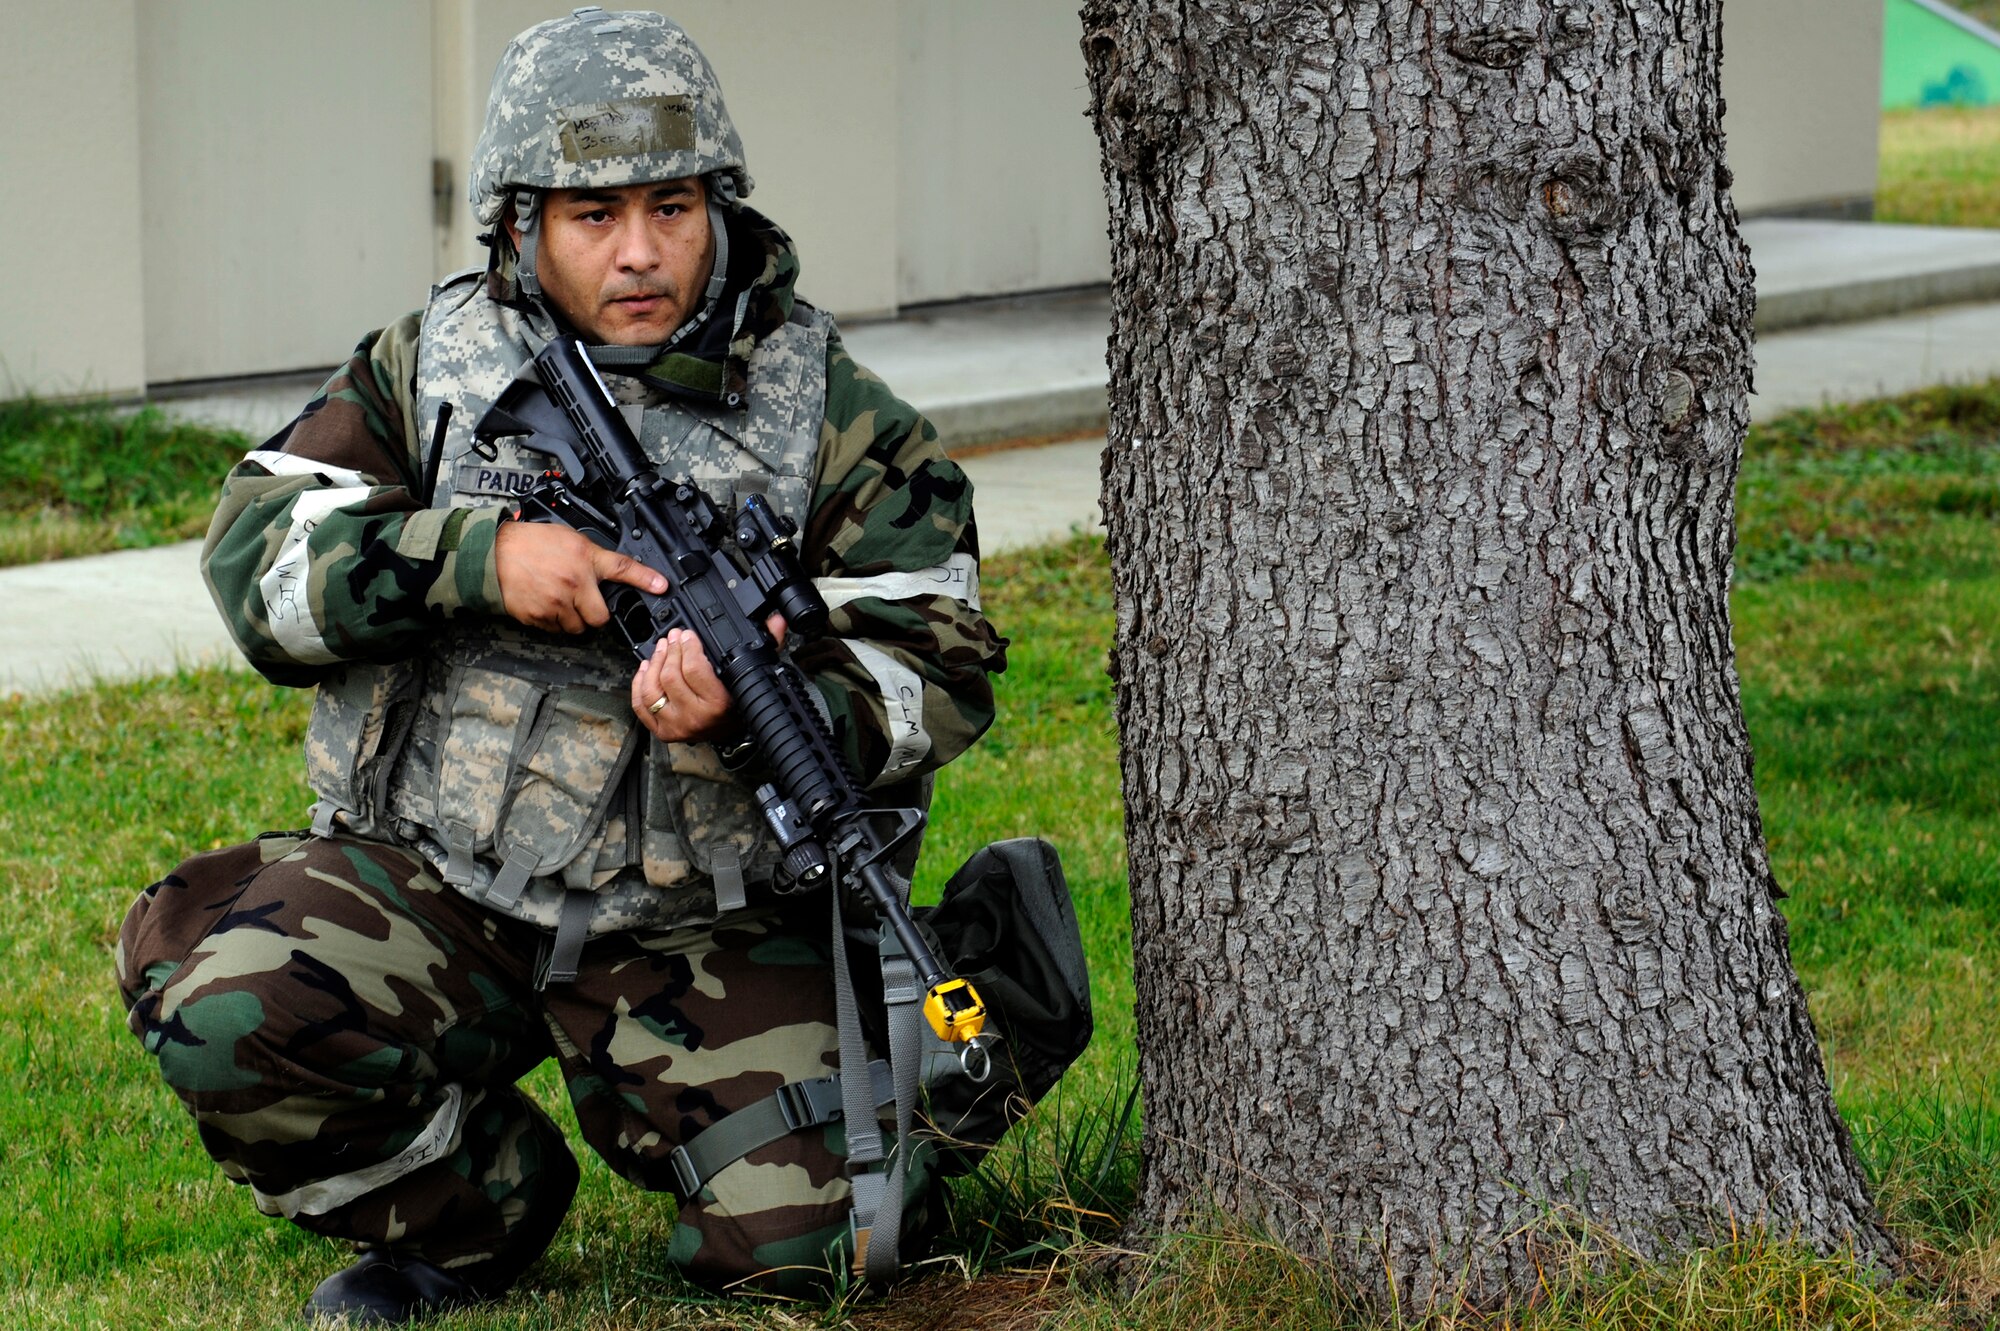 MISAWA AIR BASE, Japan - Master Sgt. Christopher Padron, 35th Security Forces Squadron, takes a defensive posture behind a tree during a training scenario, which was part of an operational readiness exercise here Nov. 9. The 35th Fighter Wing is going through rehearsed procedures, during a base ORE, to train for the operational readiness inspection next month. (U.S. Air Force photo/Tech. Sgt. Marie Brown)